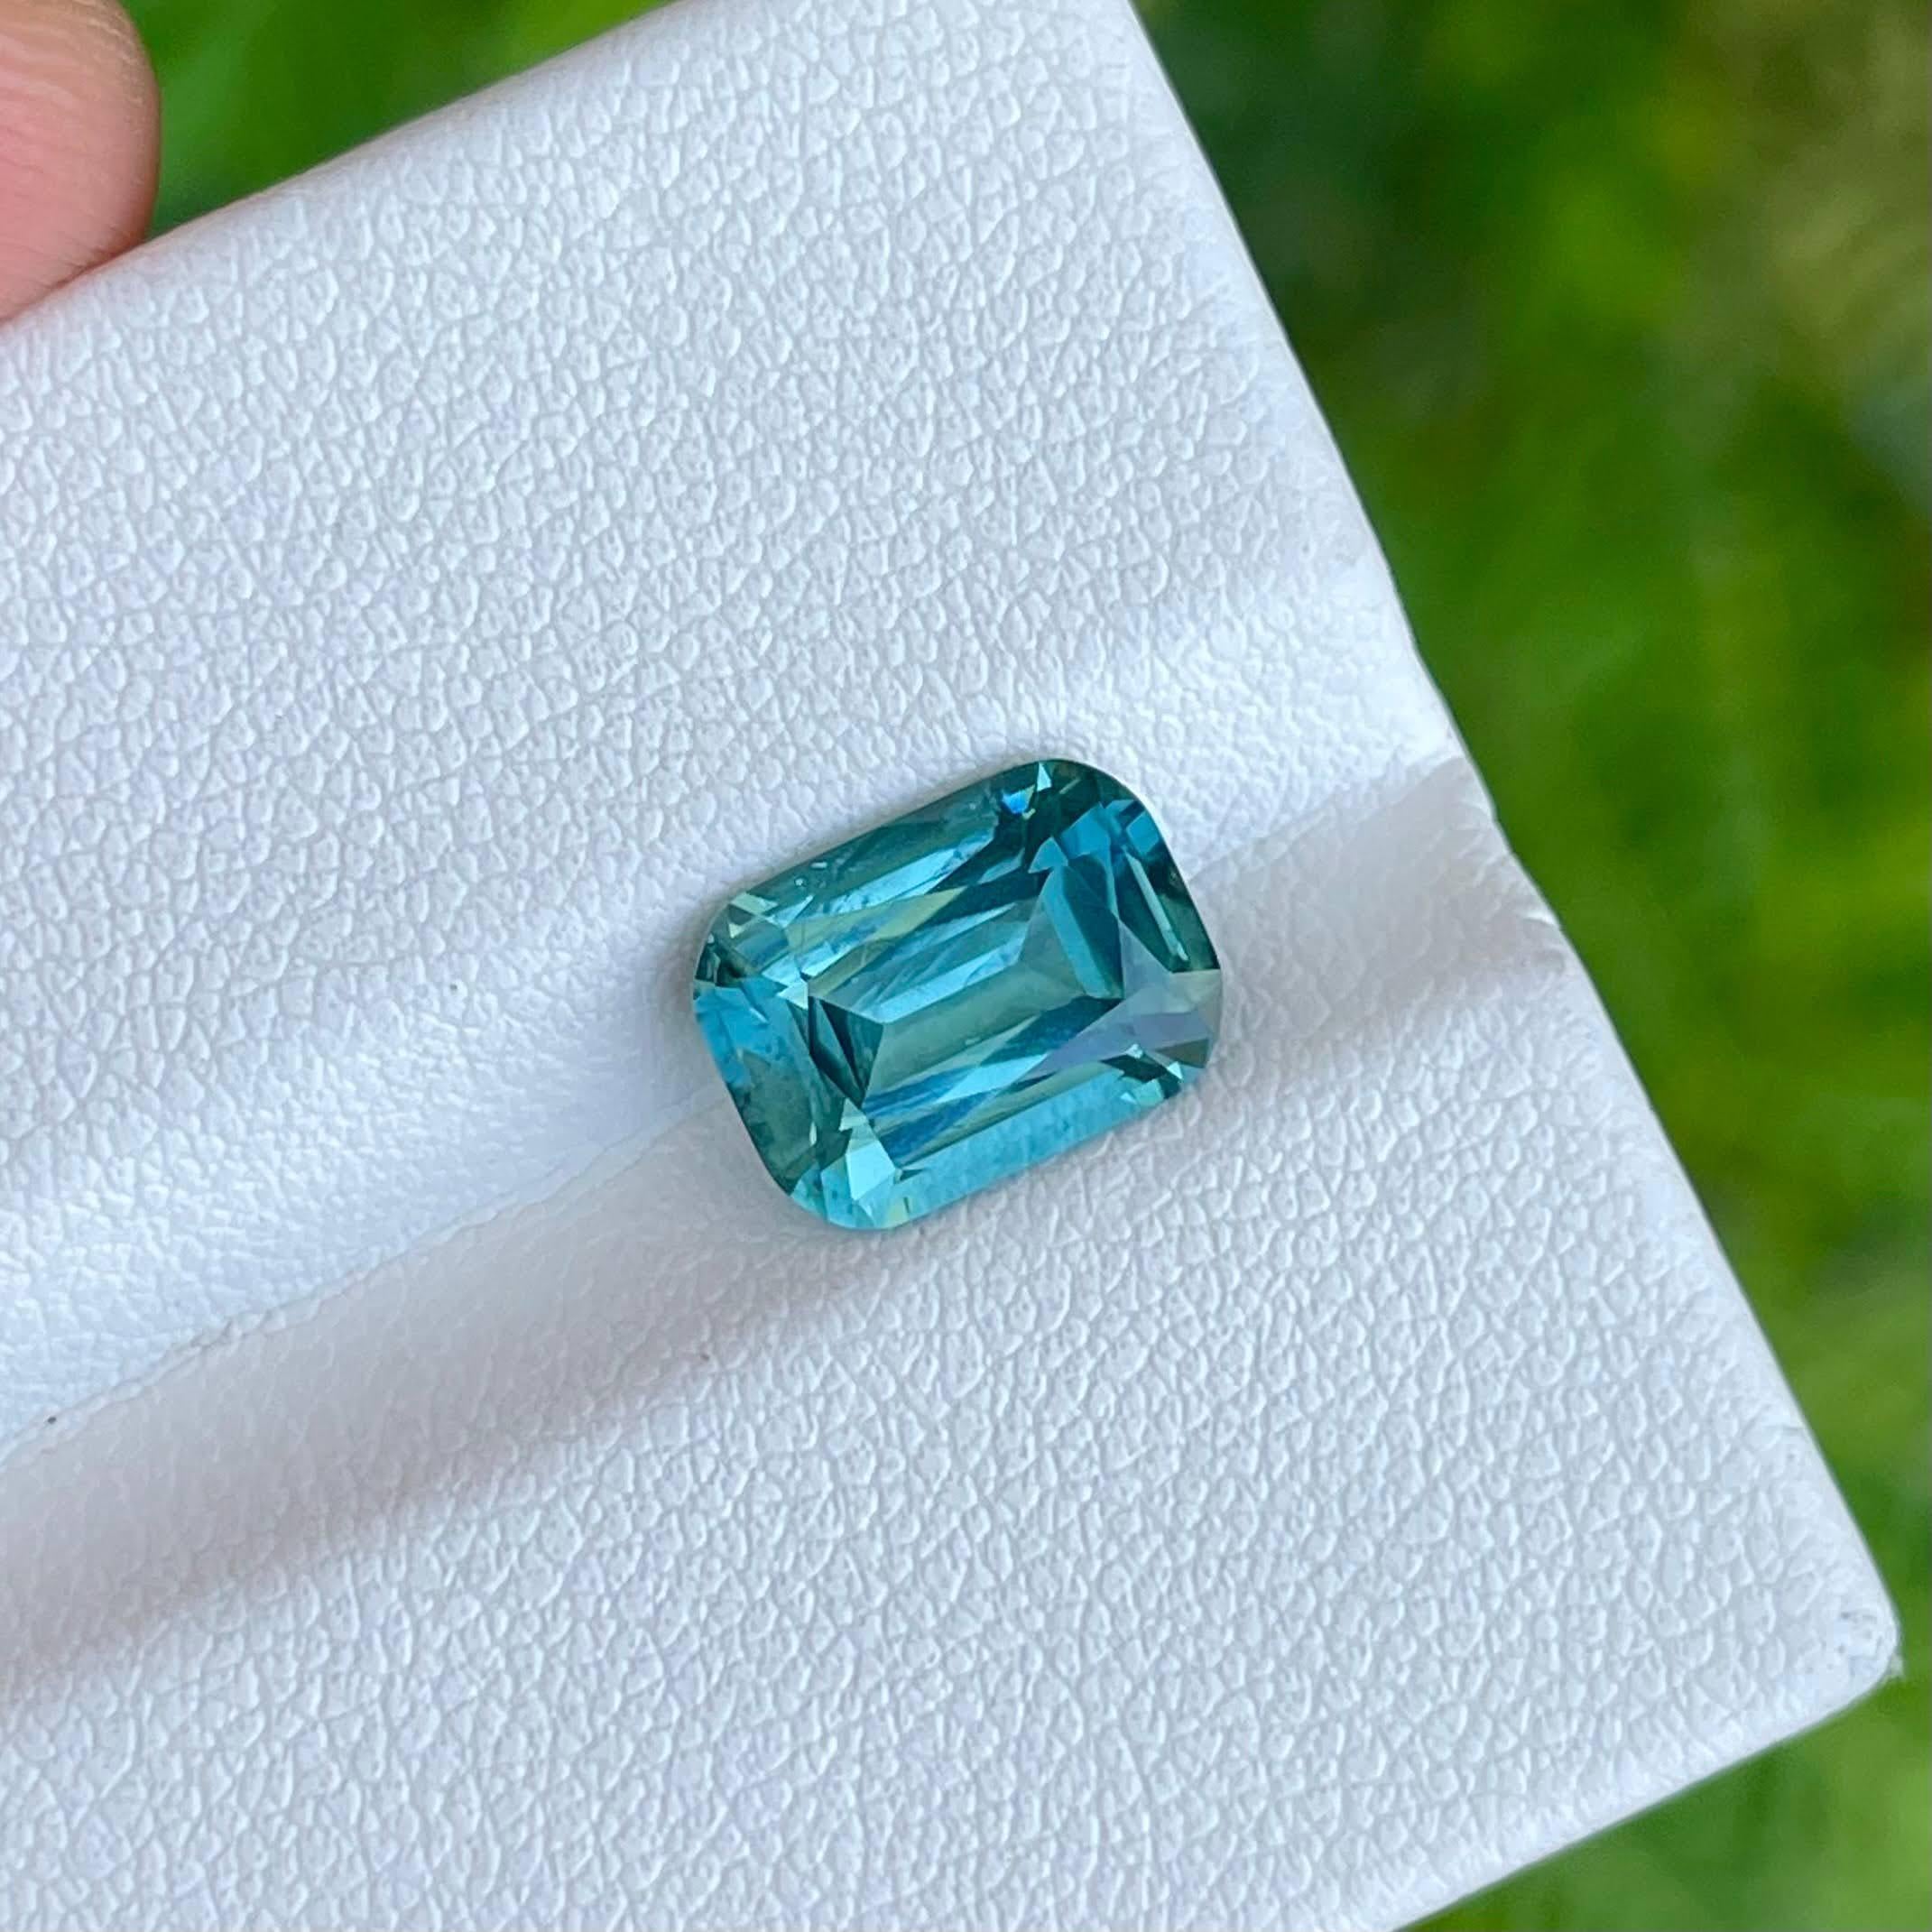 Weight 3.21 carats 
Dim 10.2x7.5x5.4 mm
Treatment None
Origin Afghanistan
Clarity VVS
Shape Cushion
Cut Step Cushion




The 3.21 carats Blue Tourmaline Stone is a captivating and exquisite gemstone, renowned for its striking beauty and unique